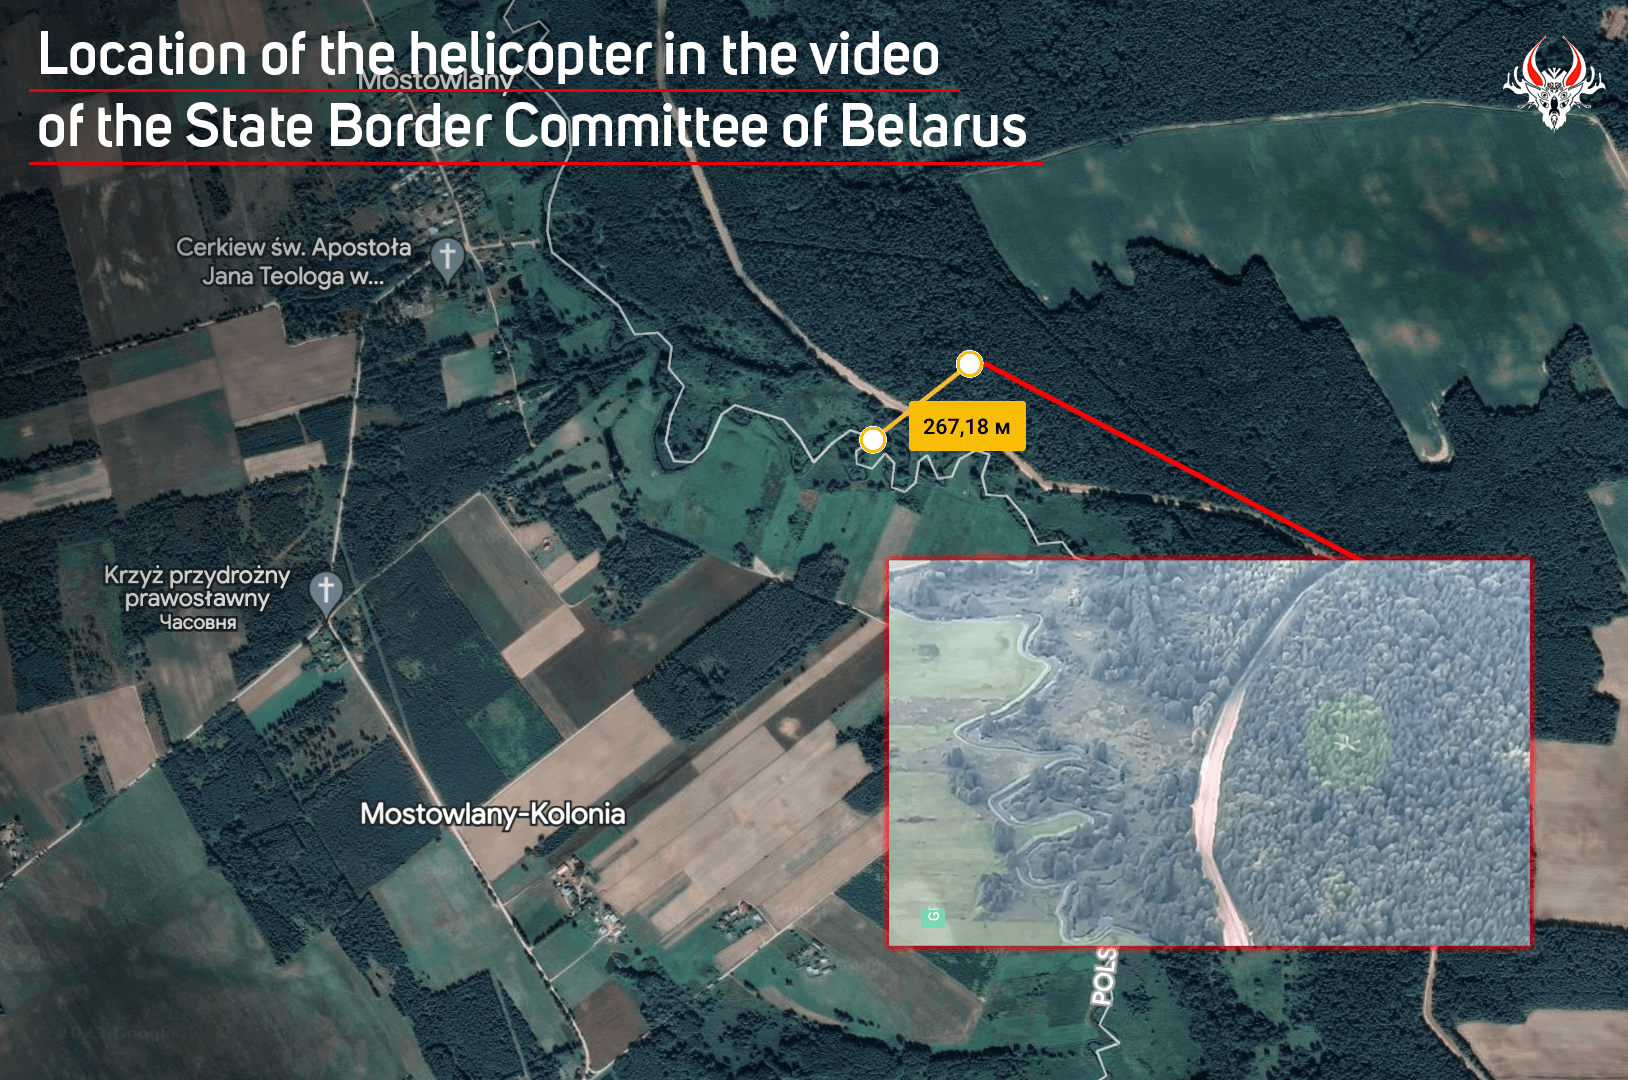 Location of the helicopter in the video of the State Border Committee of Belarus